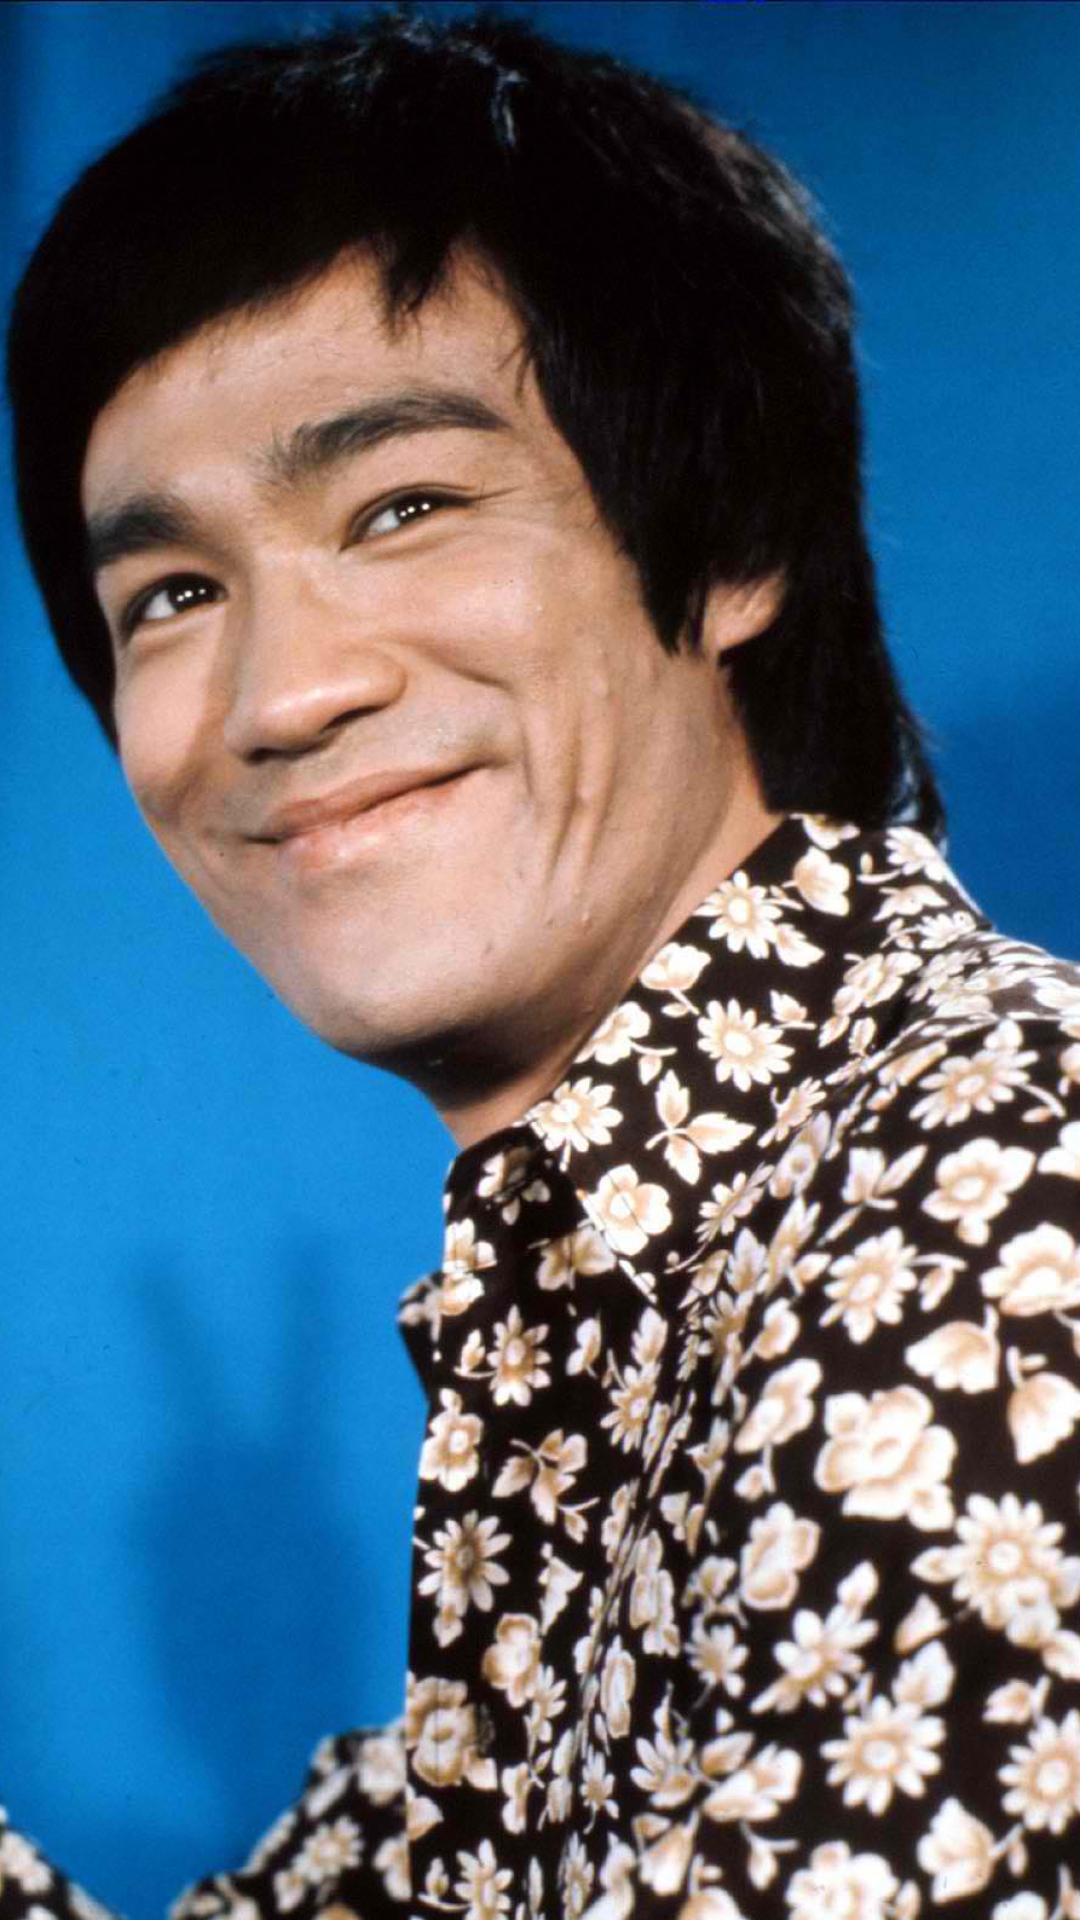 Bruce Lee Iphone Actor Celebrity Shirt Photos - Bruce Lee In Color - HD Wallpaper 